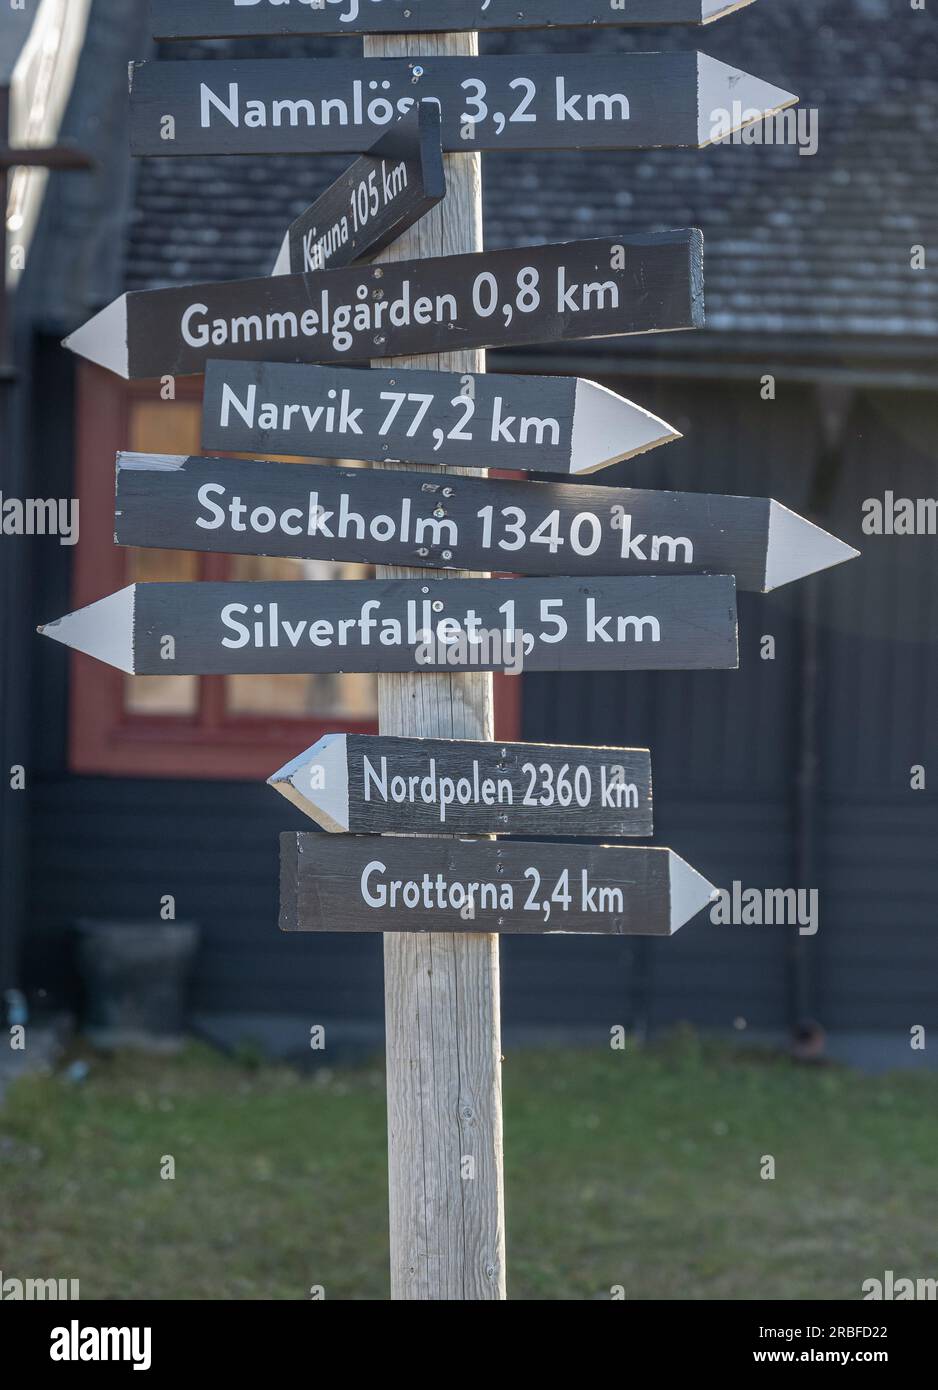 signpost Abisko Sweden Arctic Circle indicates distance and direction to various towns and sites of interest like Northpole and Stockholm Stock Photo